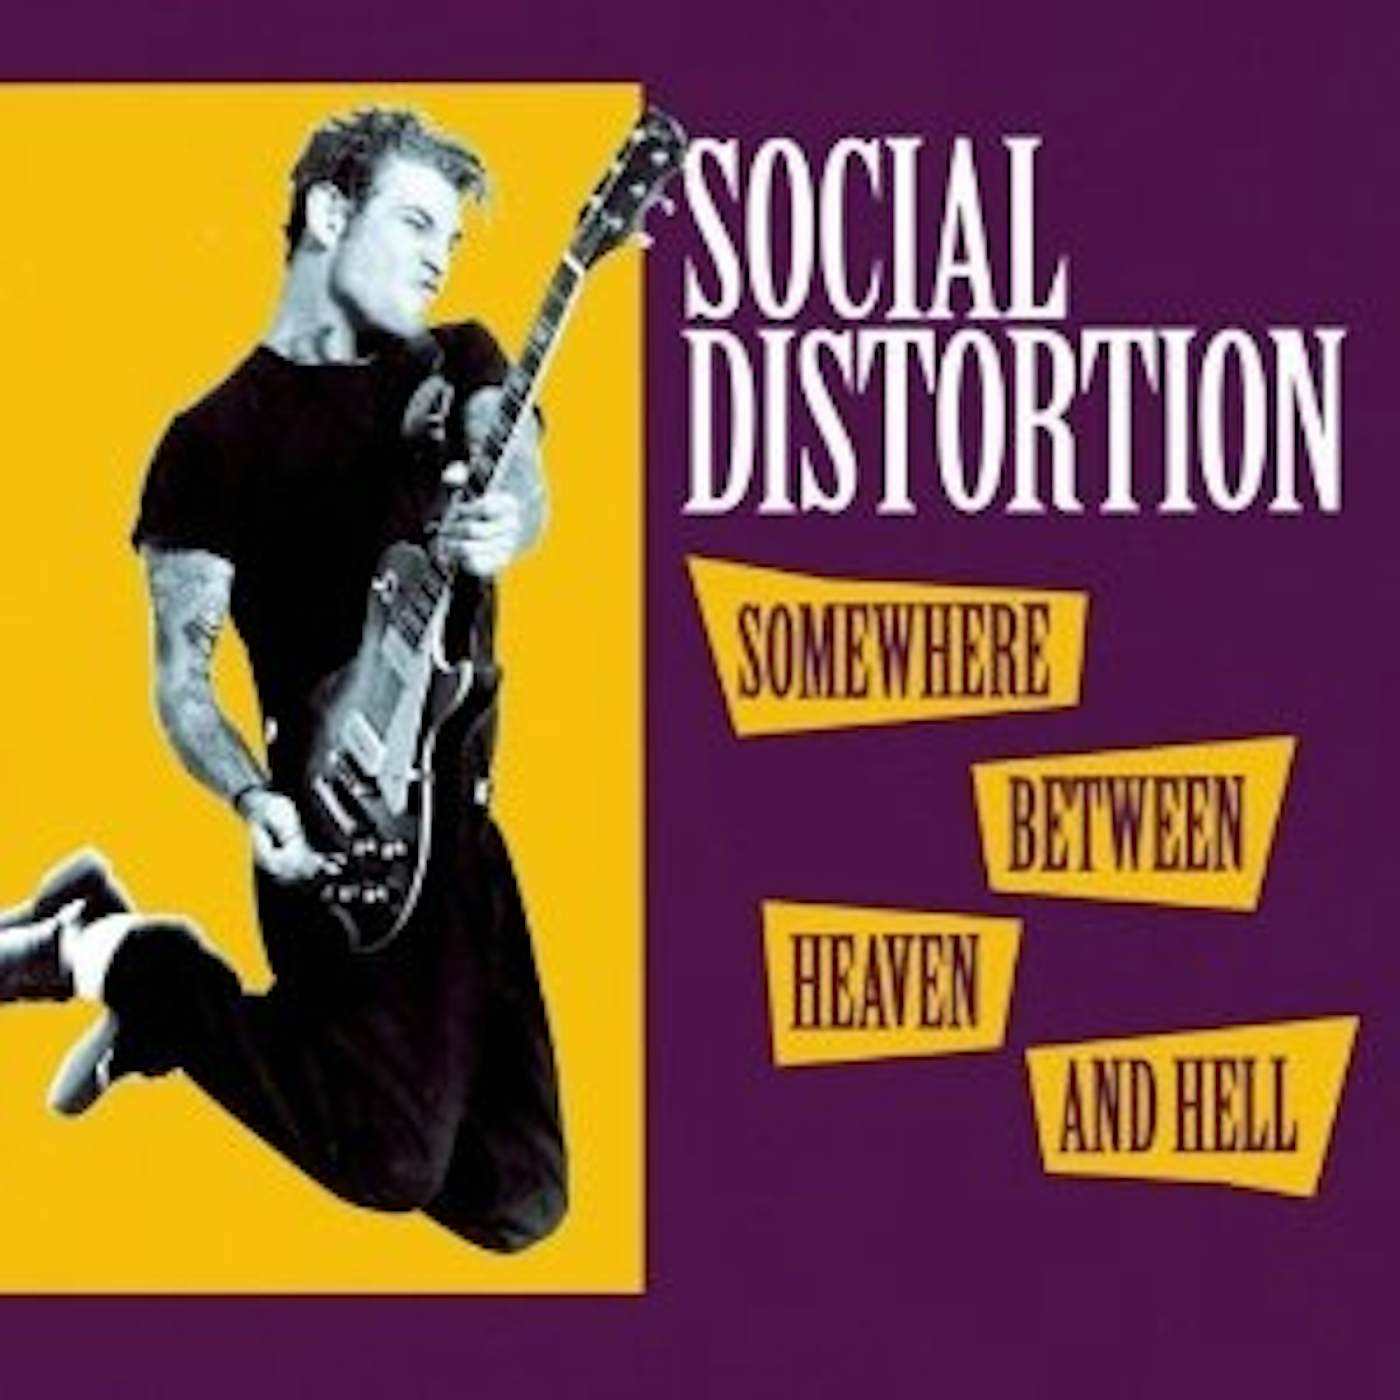 Social Distortion Somewhere Between Heaven And Hell Vinyl Record